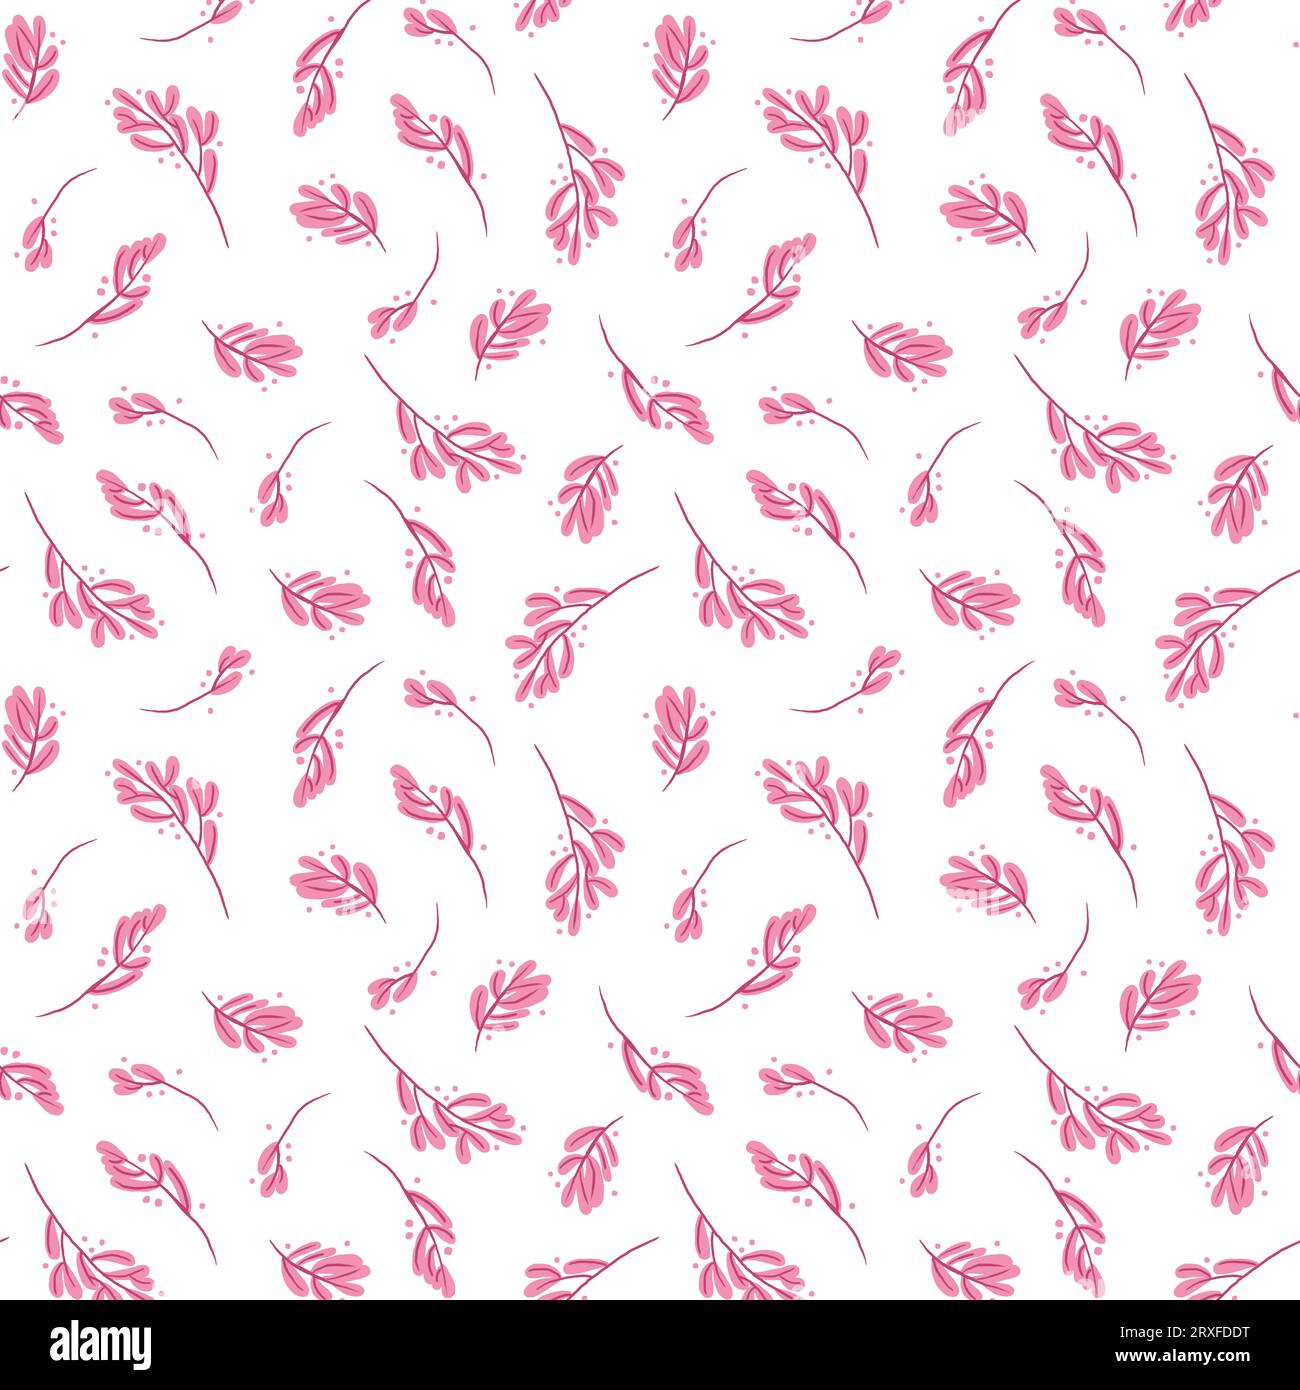 pink leave pattern Stock Photo